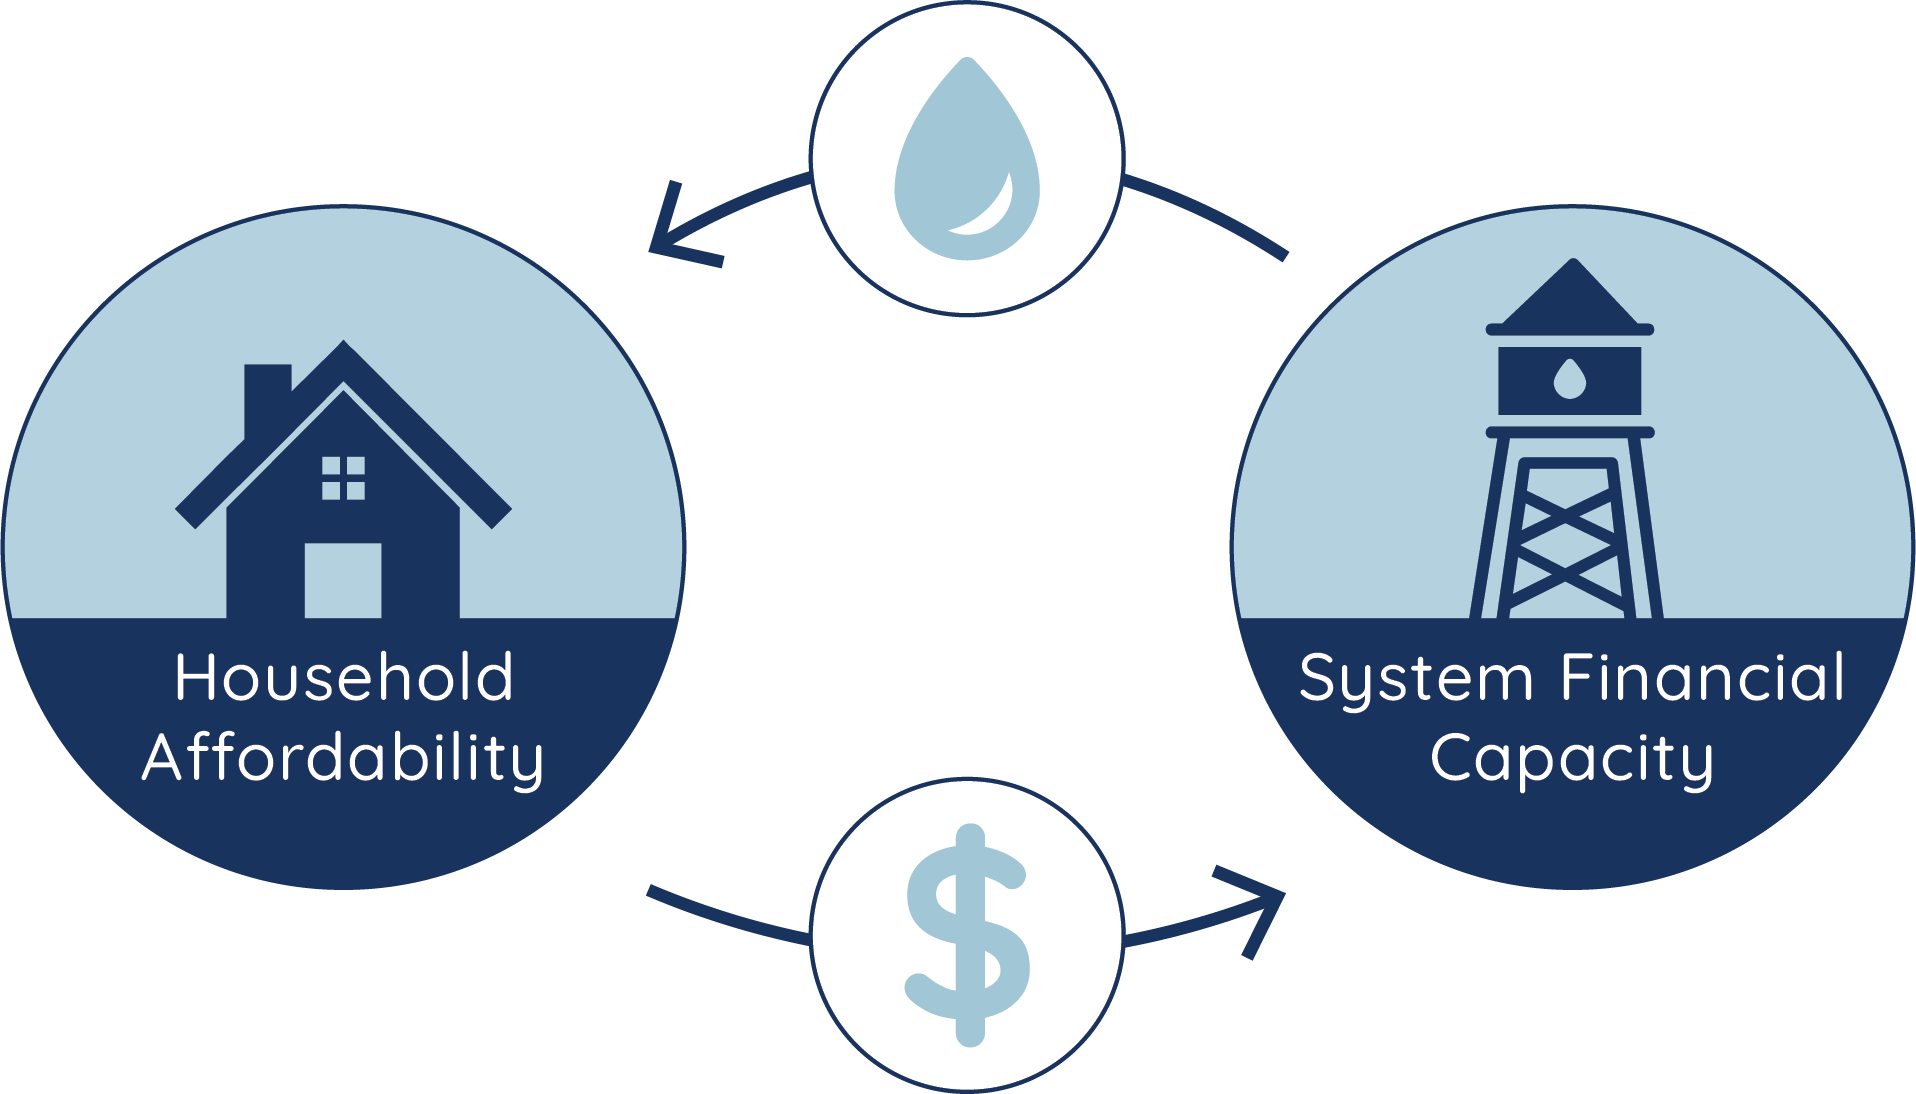 Graphic depicting the relationship between household affordability and utility system financial capacity